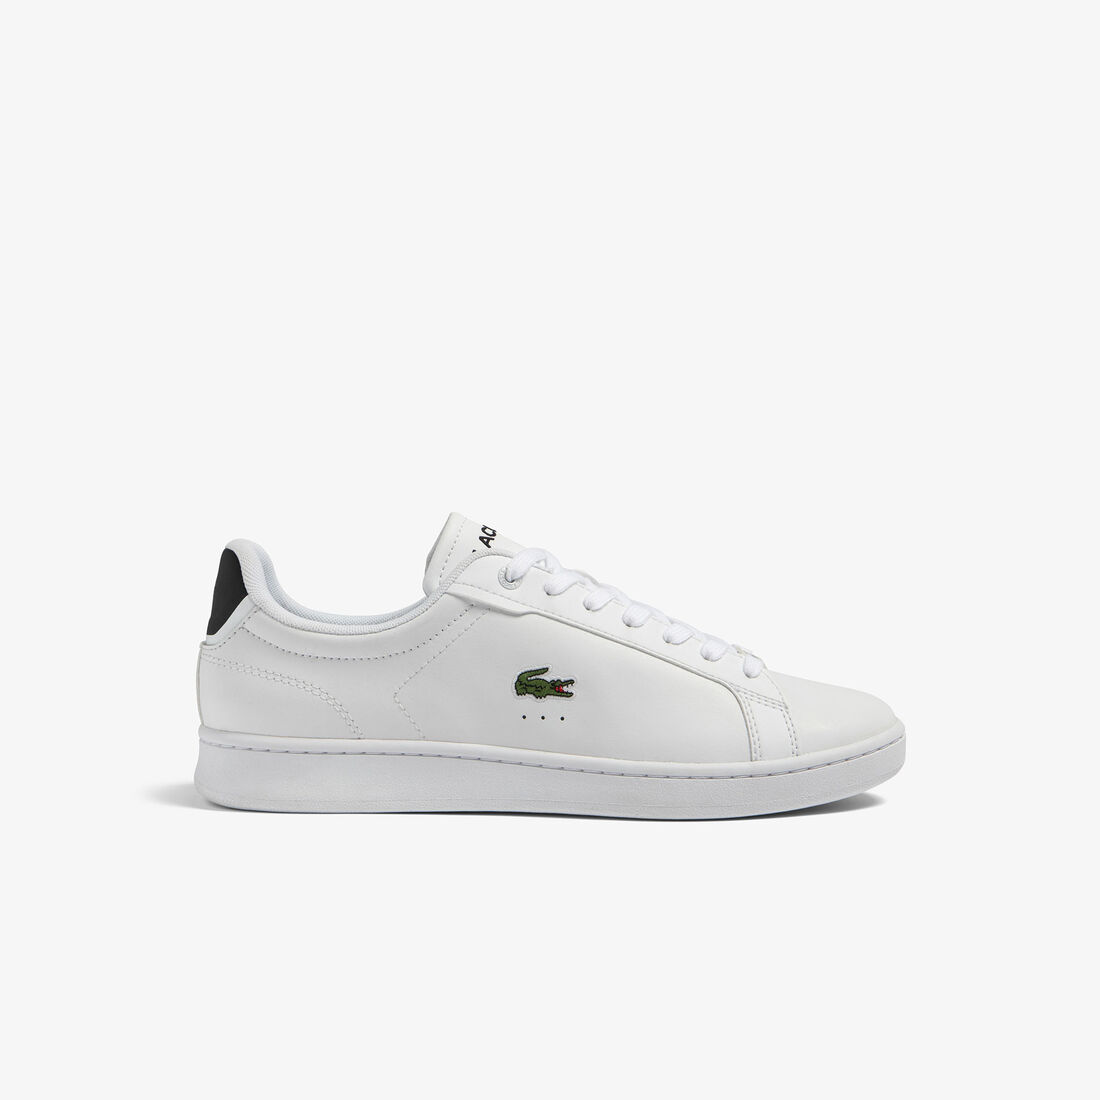 Men's Lacoste Carnaby Pro Leather Heel Pop Trainers - 45SMA0111-147